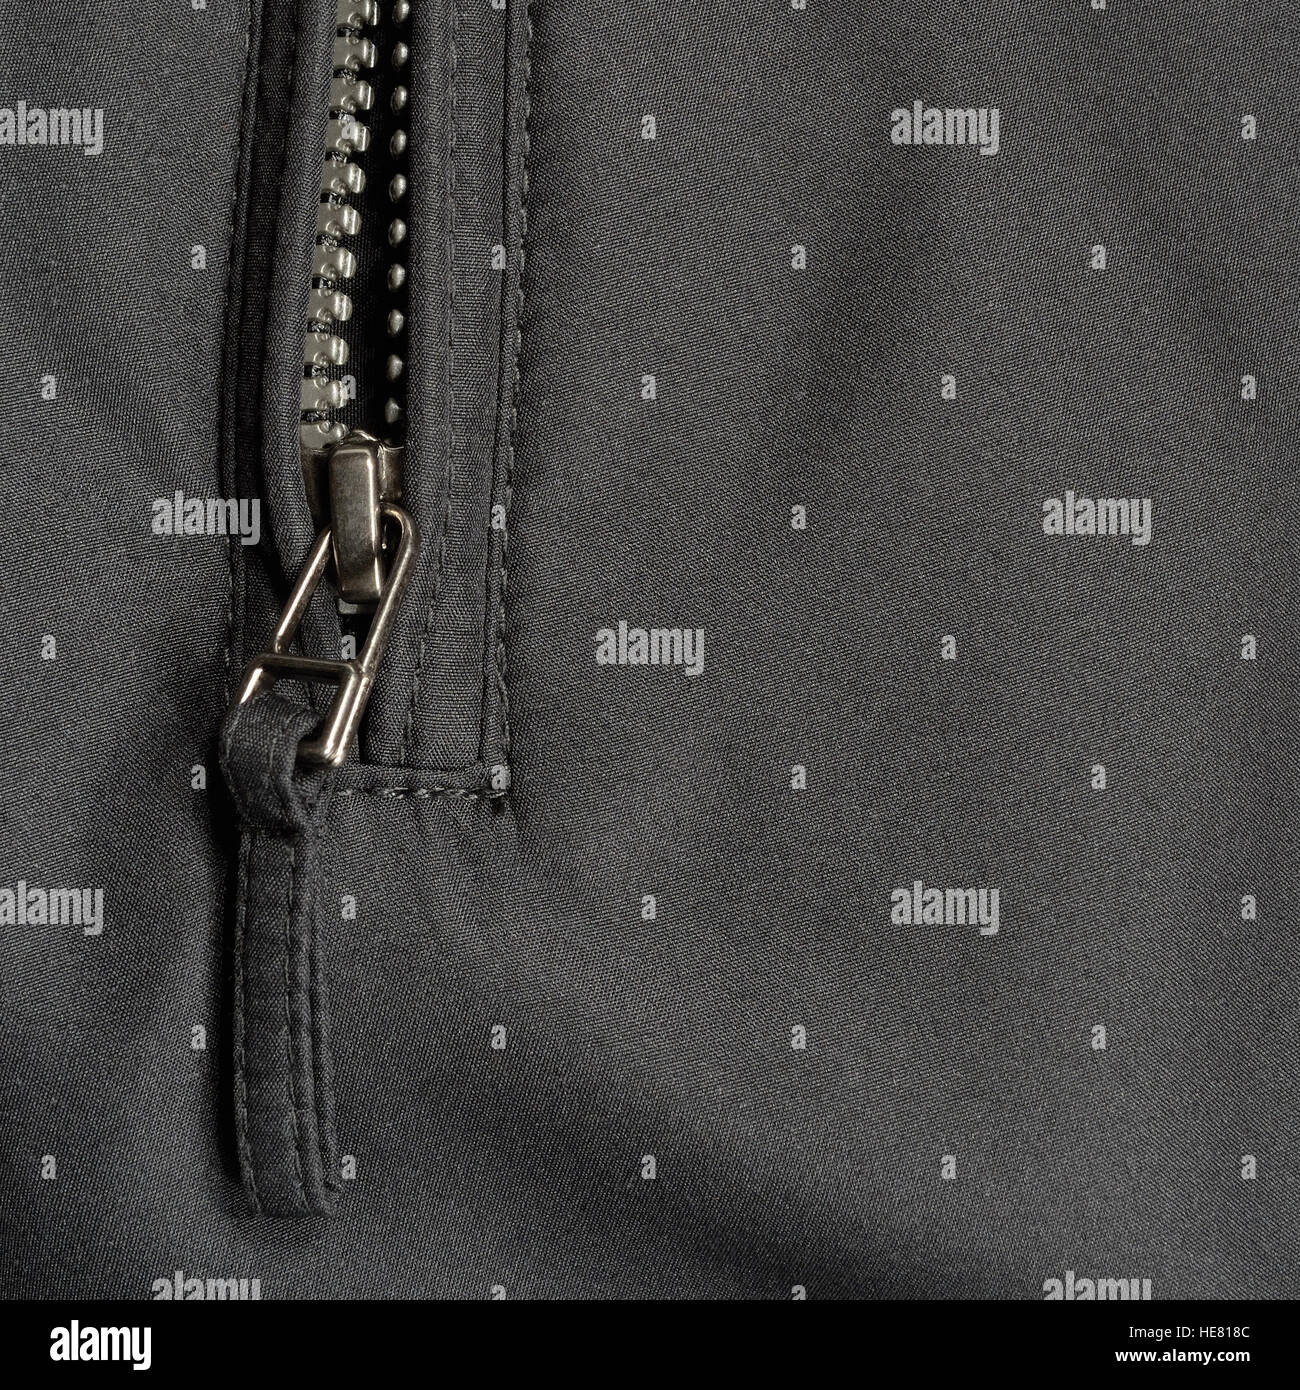 Black polyester twill fabric texture background, open jacket zipper pull detail, textured textile, macro closeup, large detailed Stock Photo